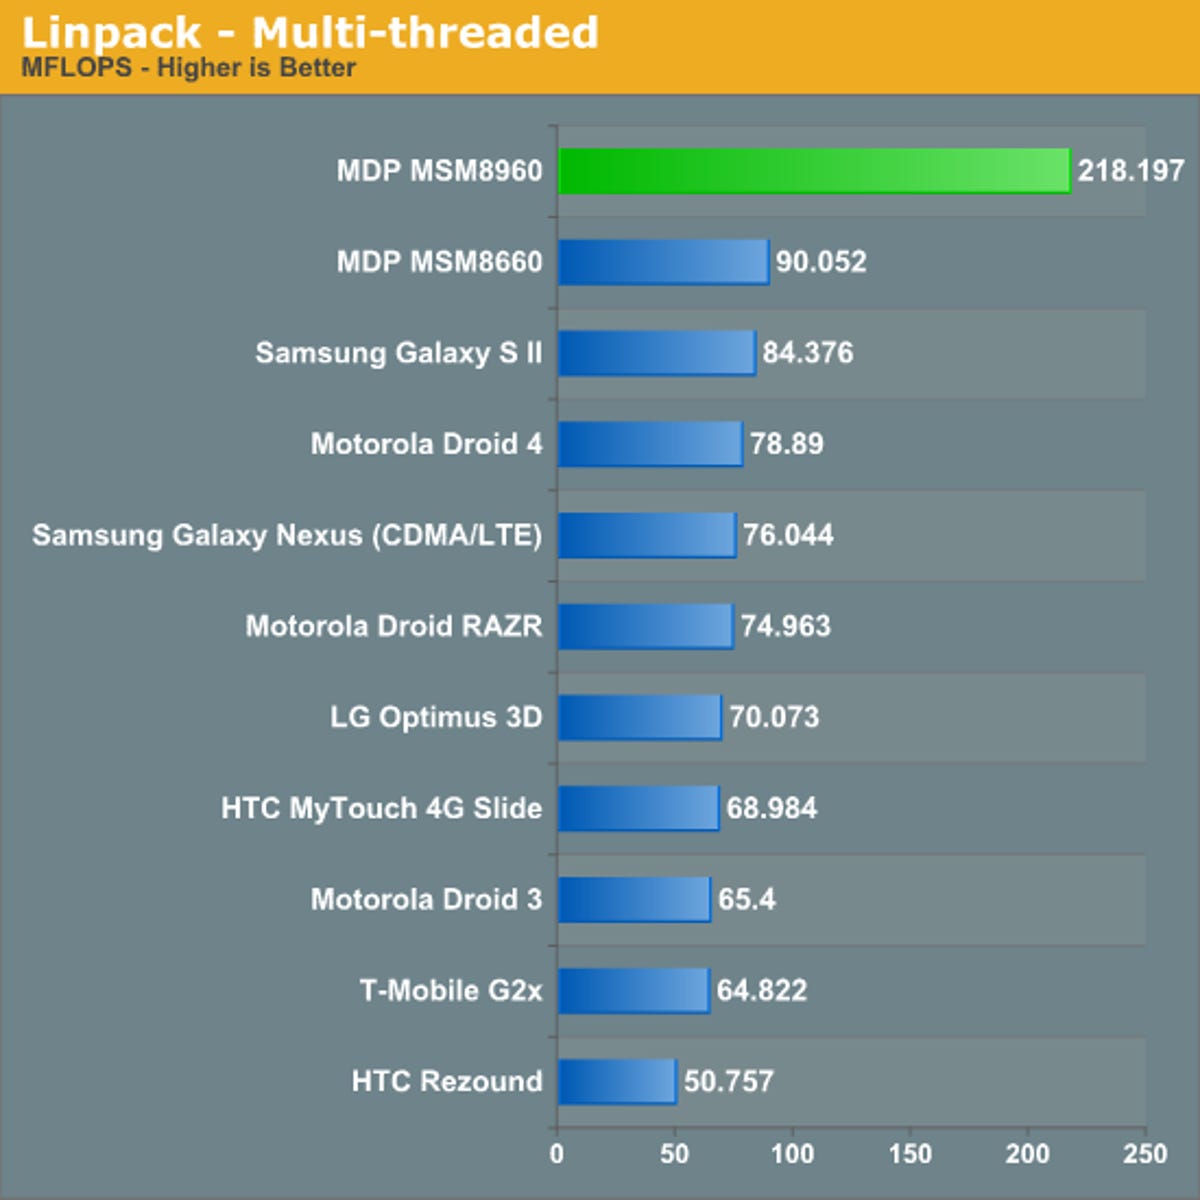 The S4's Linpack 'performance advantage here is insane,' said Anandtech.